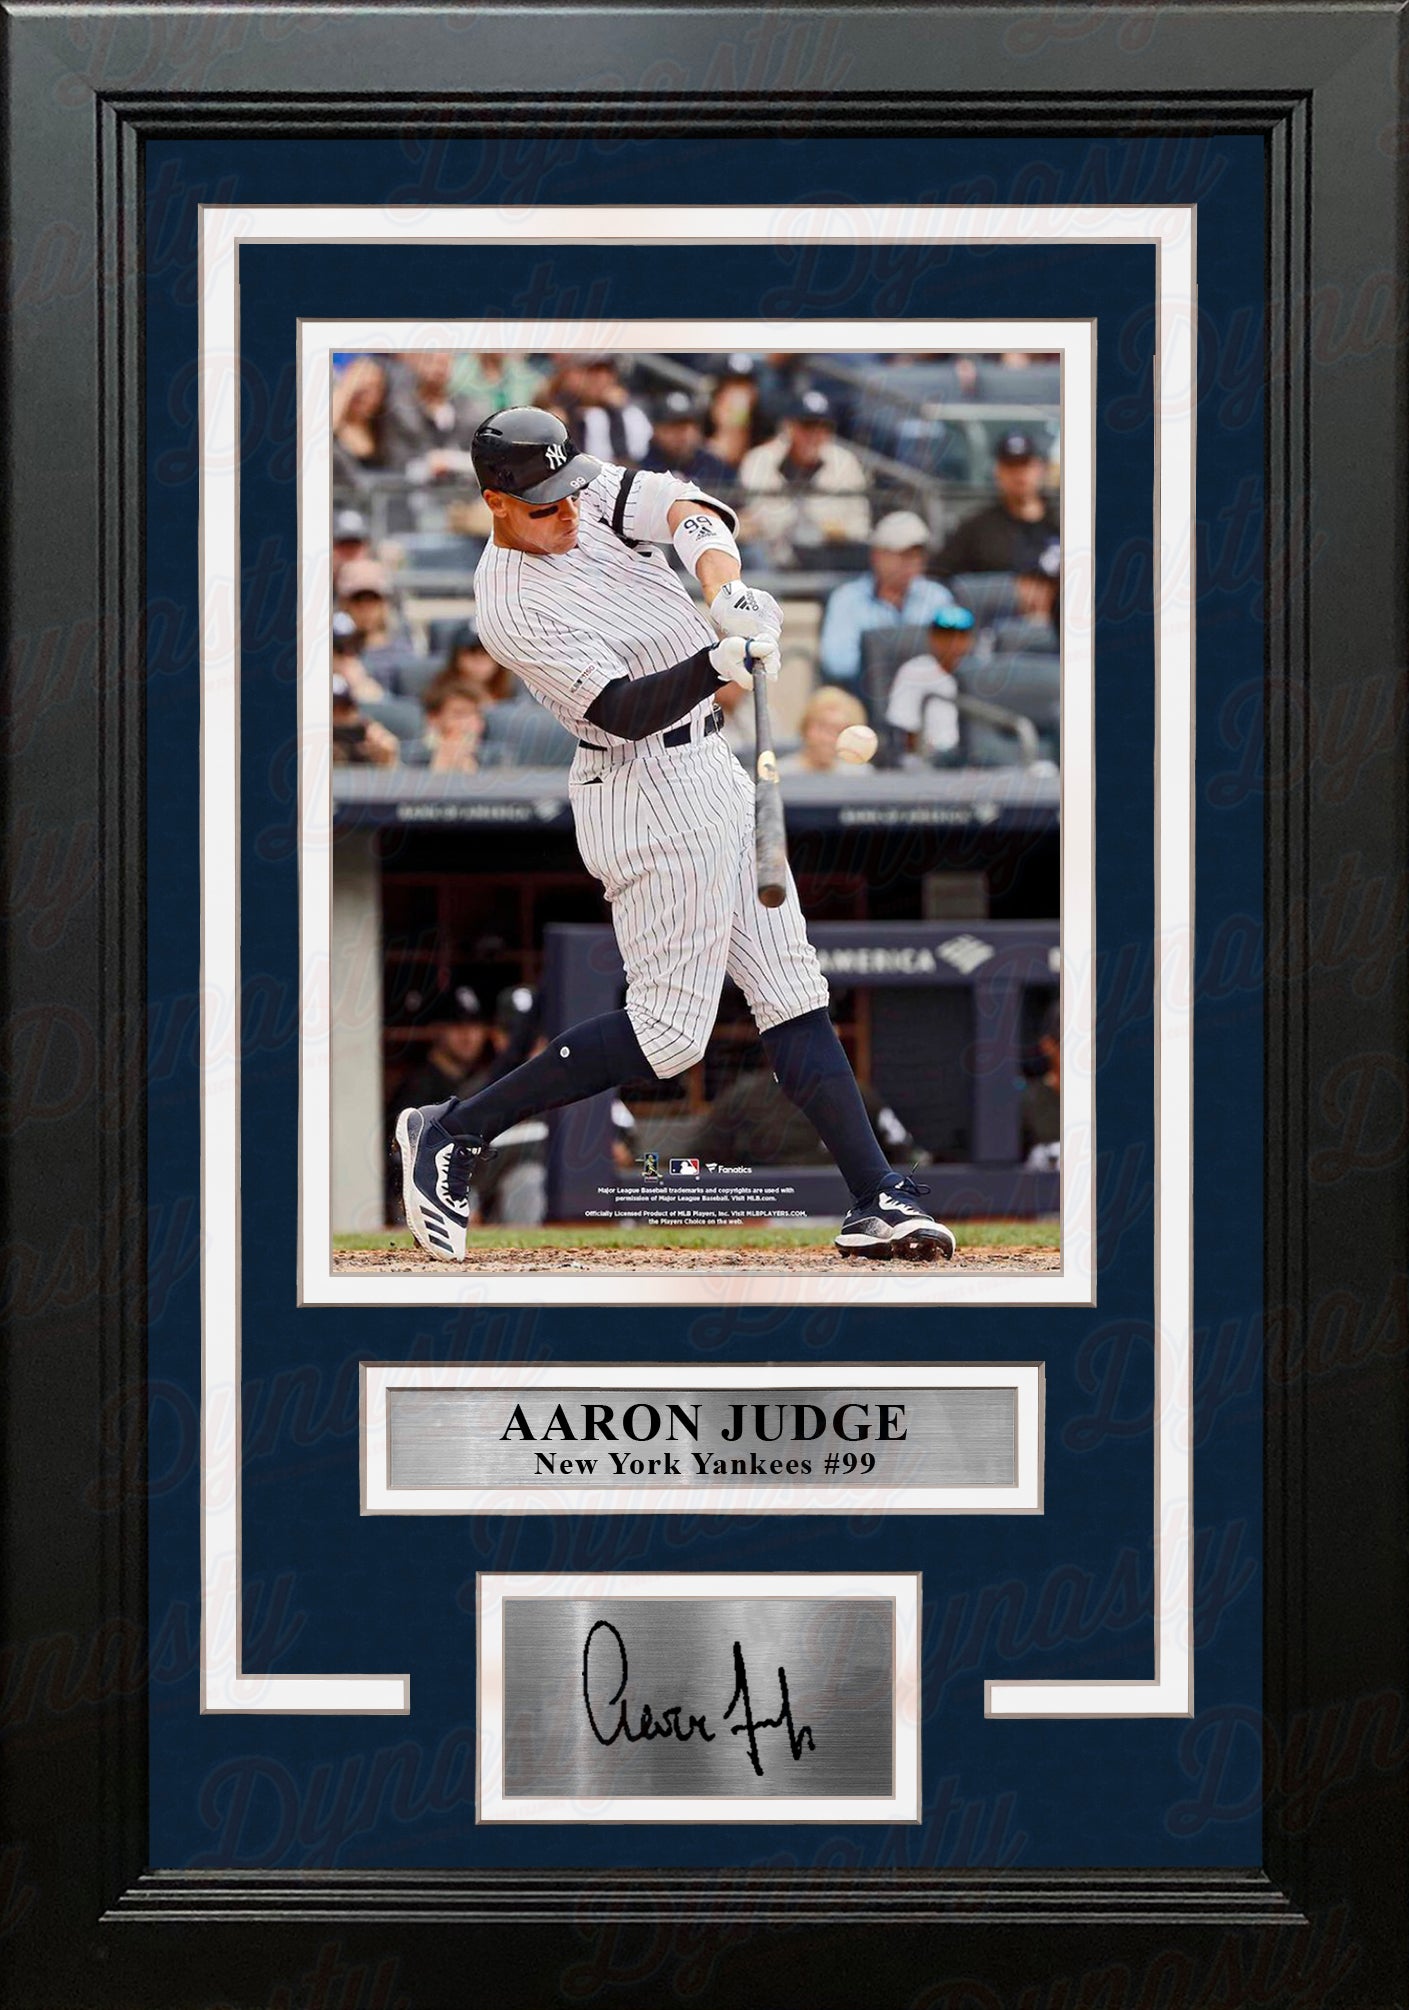 Aaron Judge in Action New York Yankees 8 x 10 Framed Baseball Photo with  Engraved Autograph